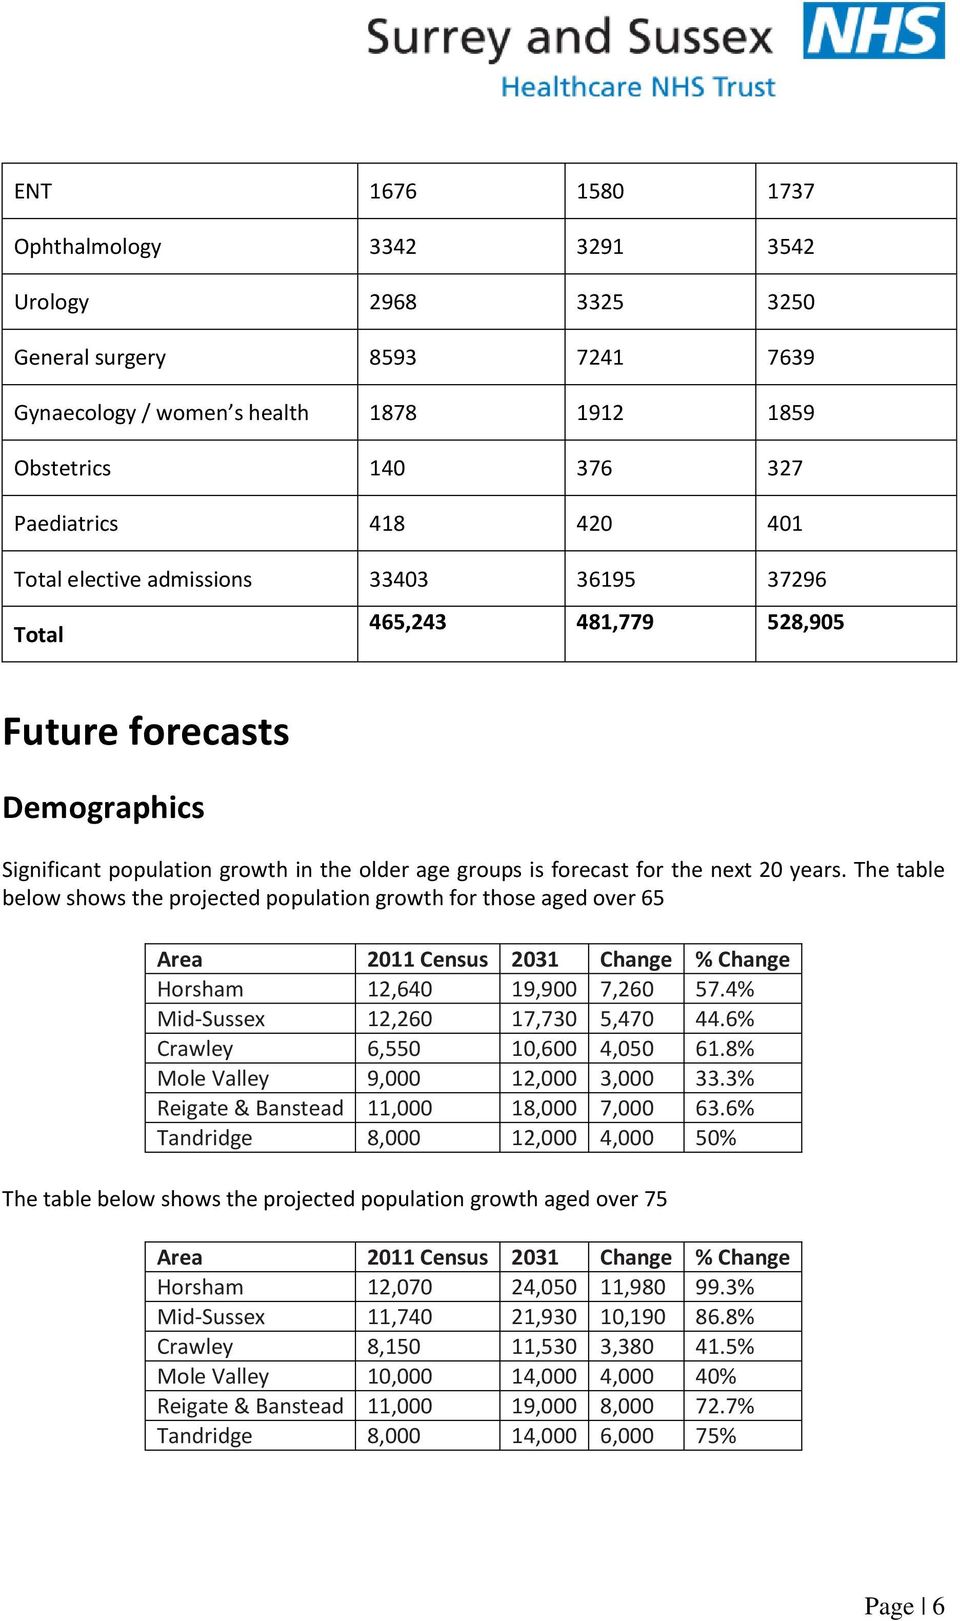 The table below shows the projected population growth for those aged over 65 Area 2011 Census 2031 Change % Change Horsham 12,640 19,900 7,260 57.4% Mid-Sussex 12,260 17,730 5,470 44.